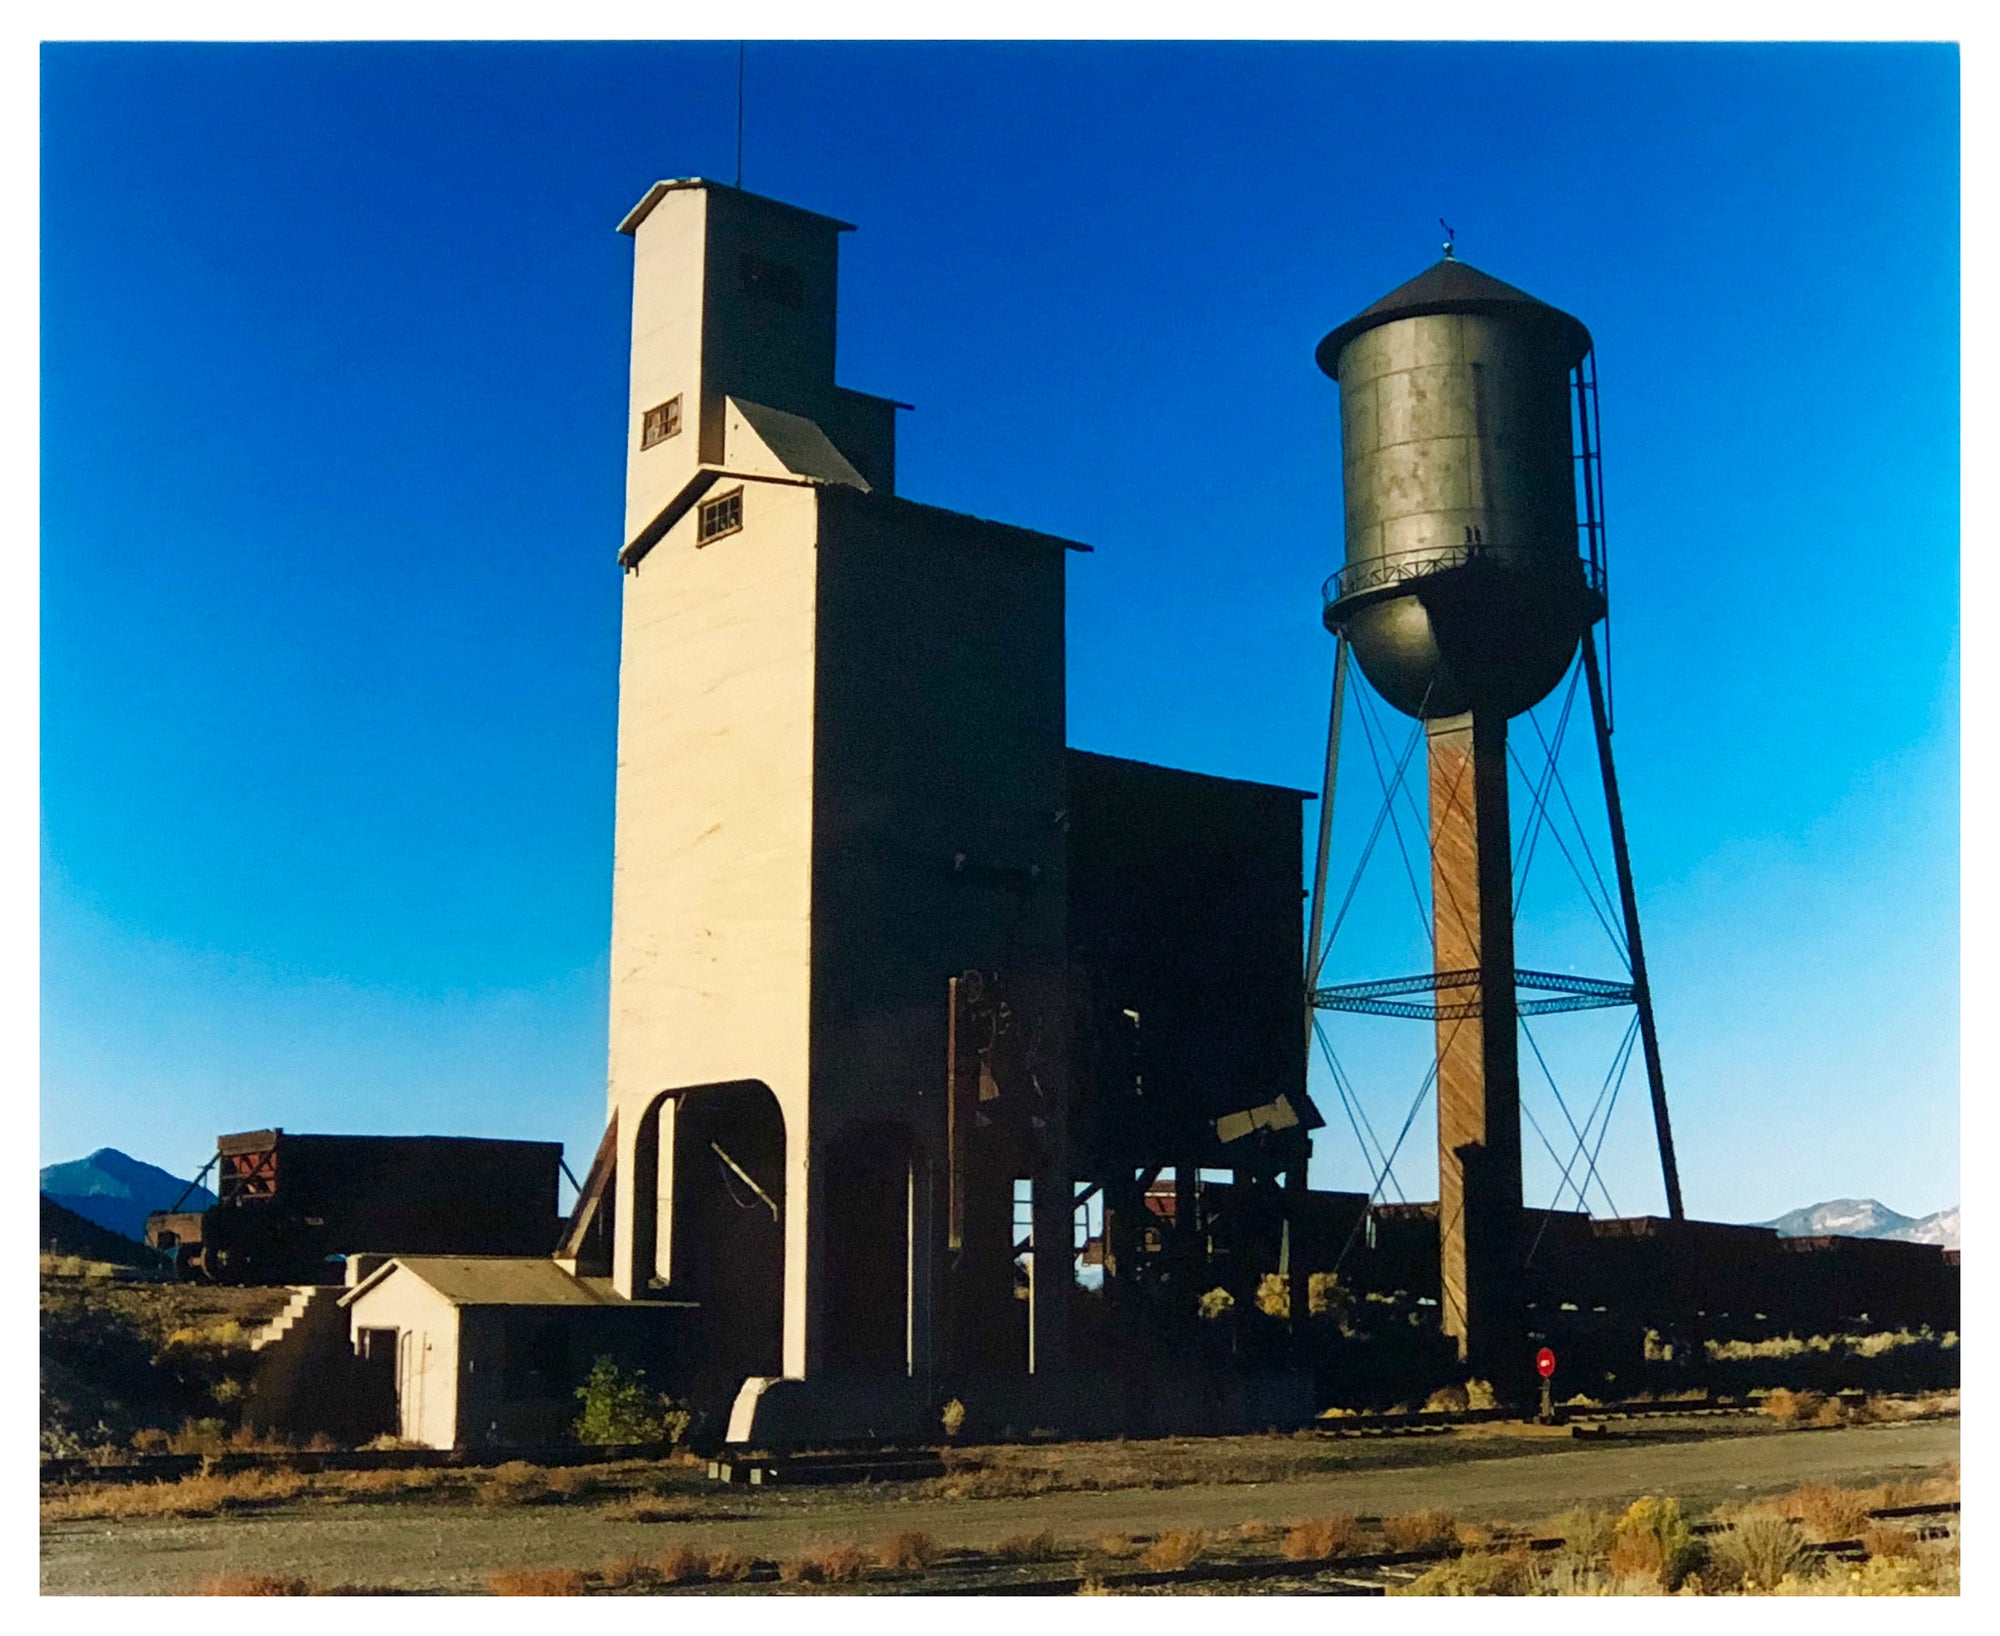 A grain silo and a water tower against a blue sky in Ely, Nevada, iconic American architecture photography by Richard Heeps.